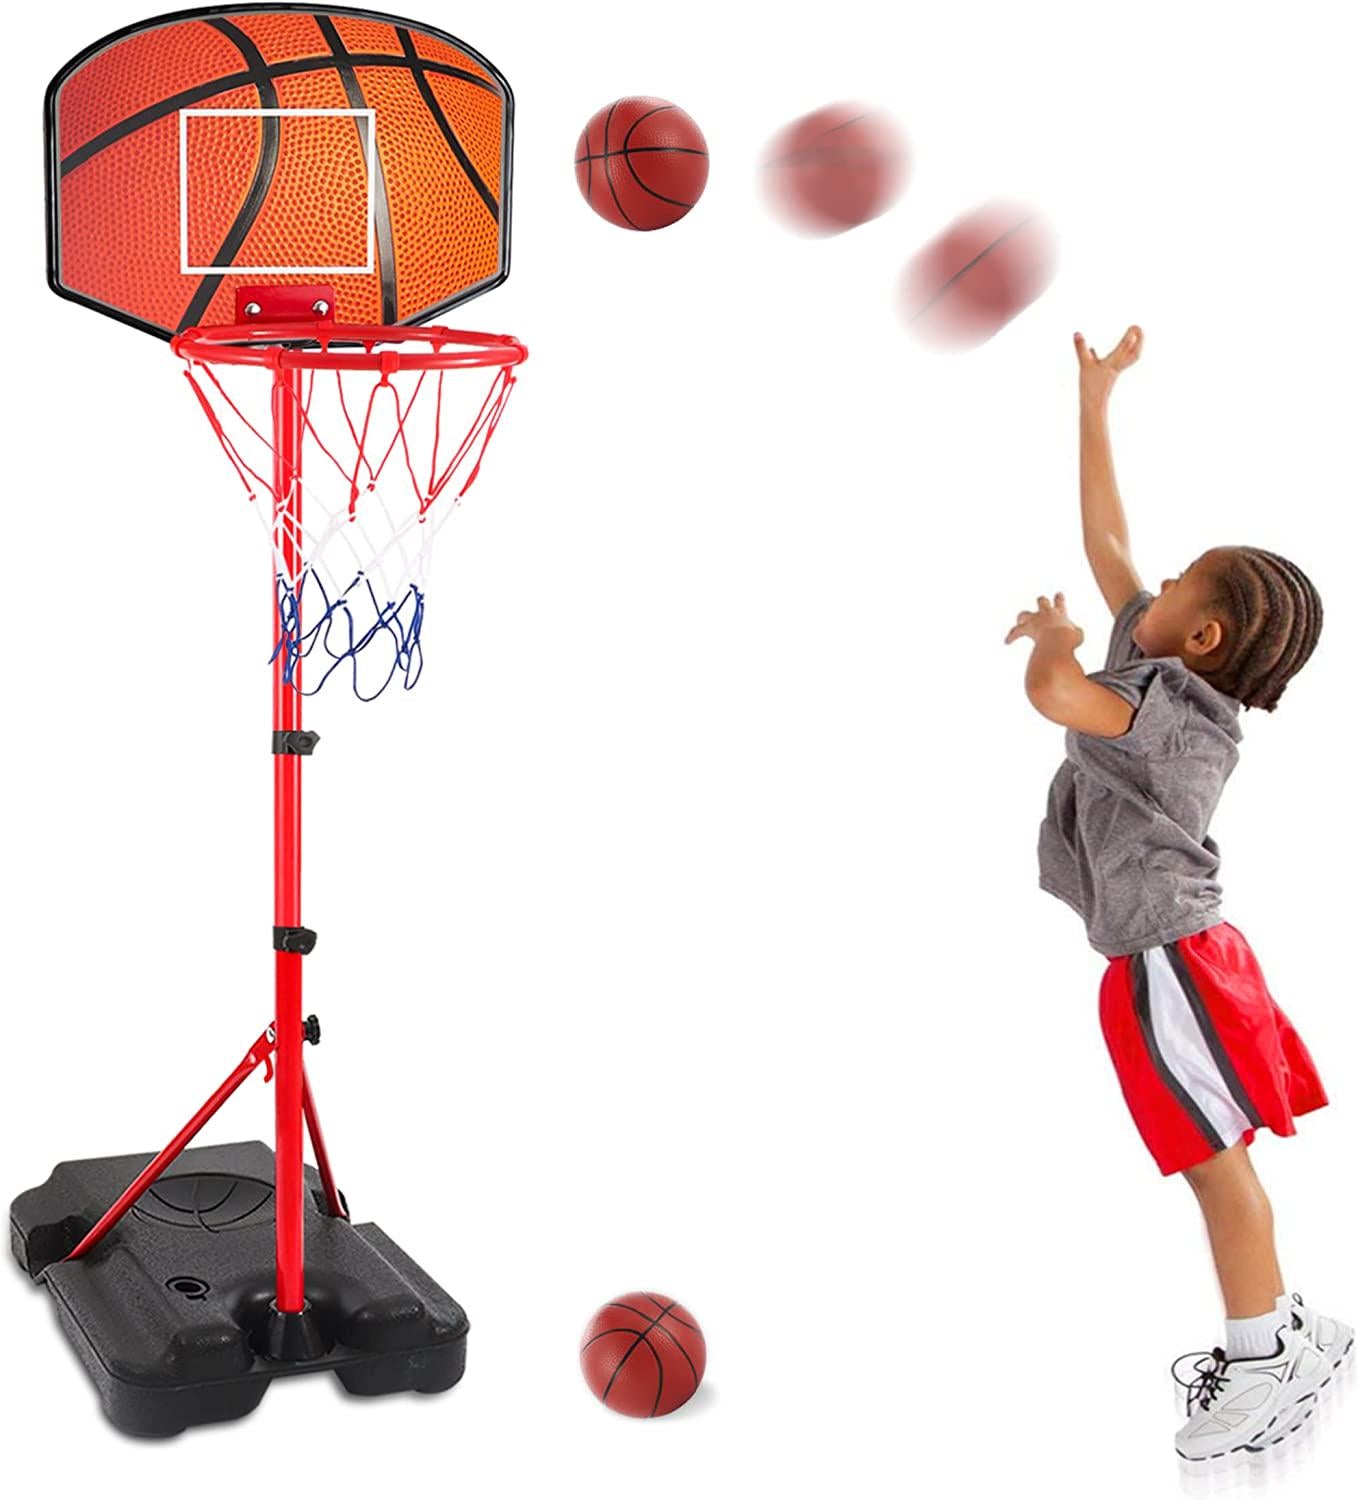 Hieoby, Kids Basketball Hoop for 1 2 3 4 5 6 Year Old Stand Adjustable Height 3.5ft-5.5ft Toddler Boy Basketball Hoop Indoor Mini Basketball Hoops Goal Ball Games Toys for Girl Boy Age 1-3 2-4 3-5